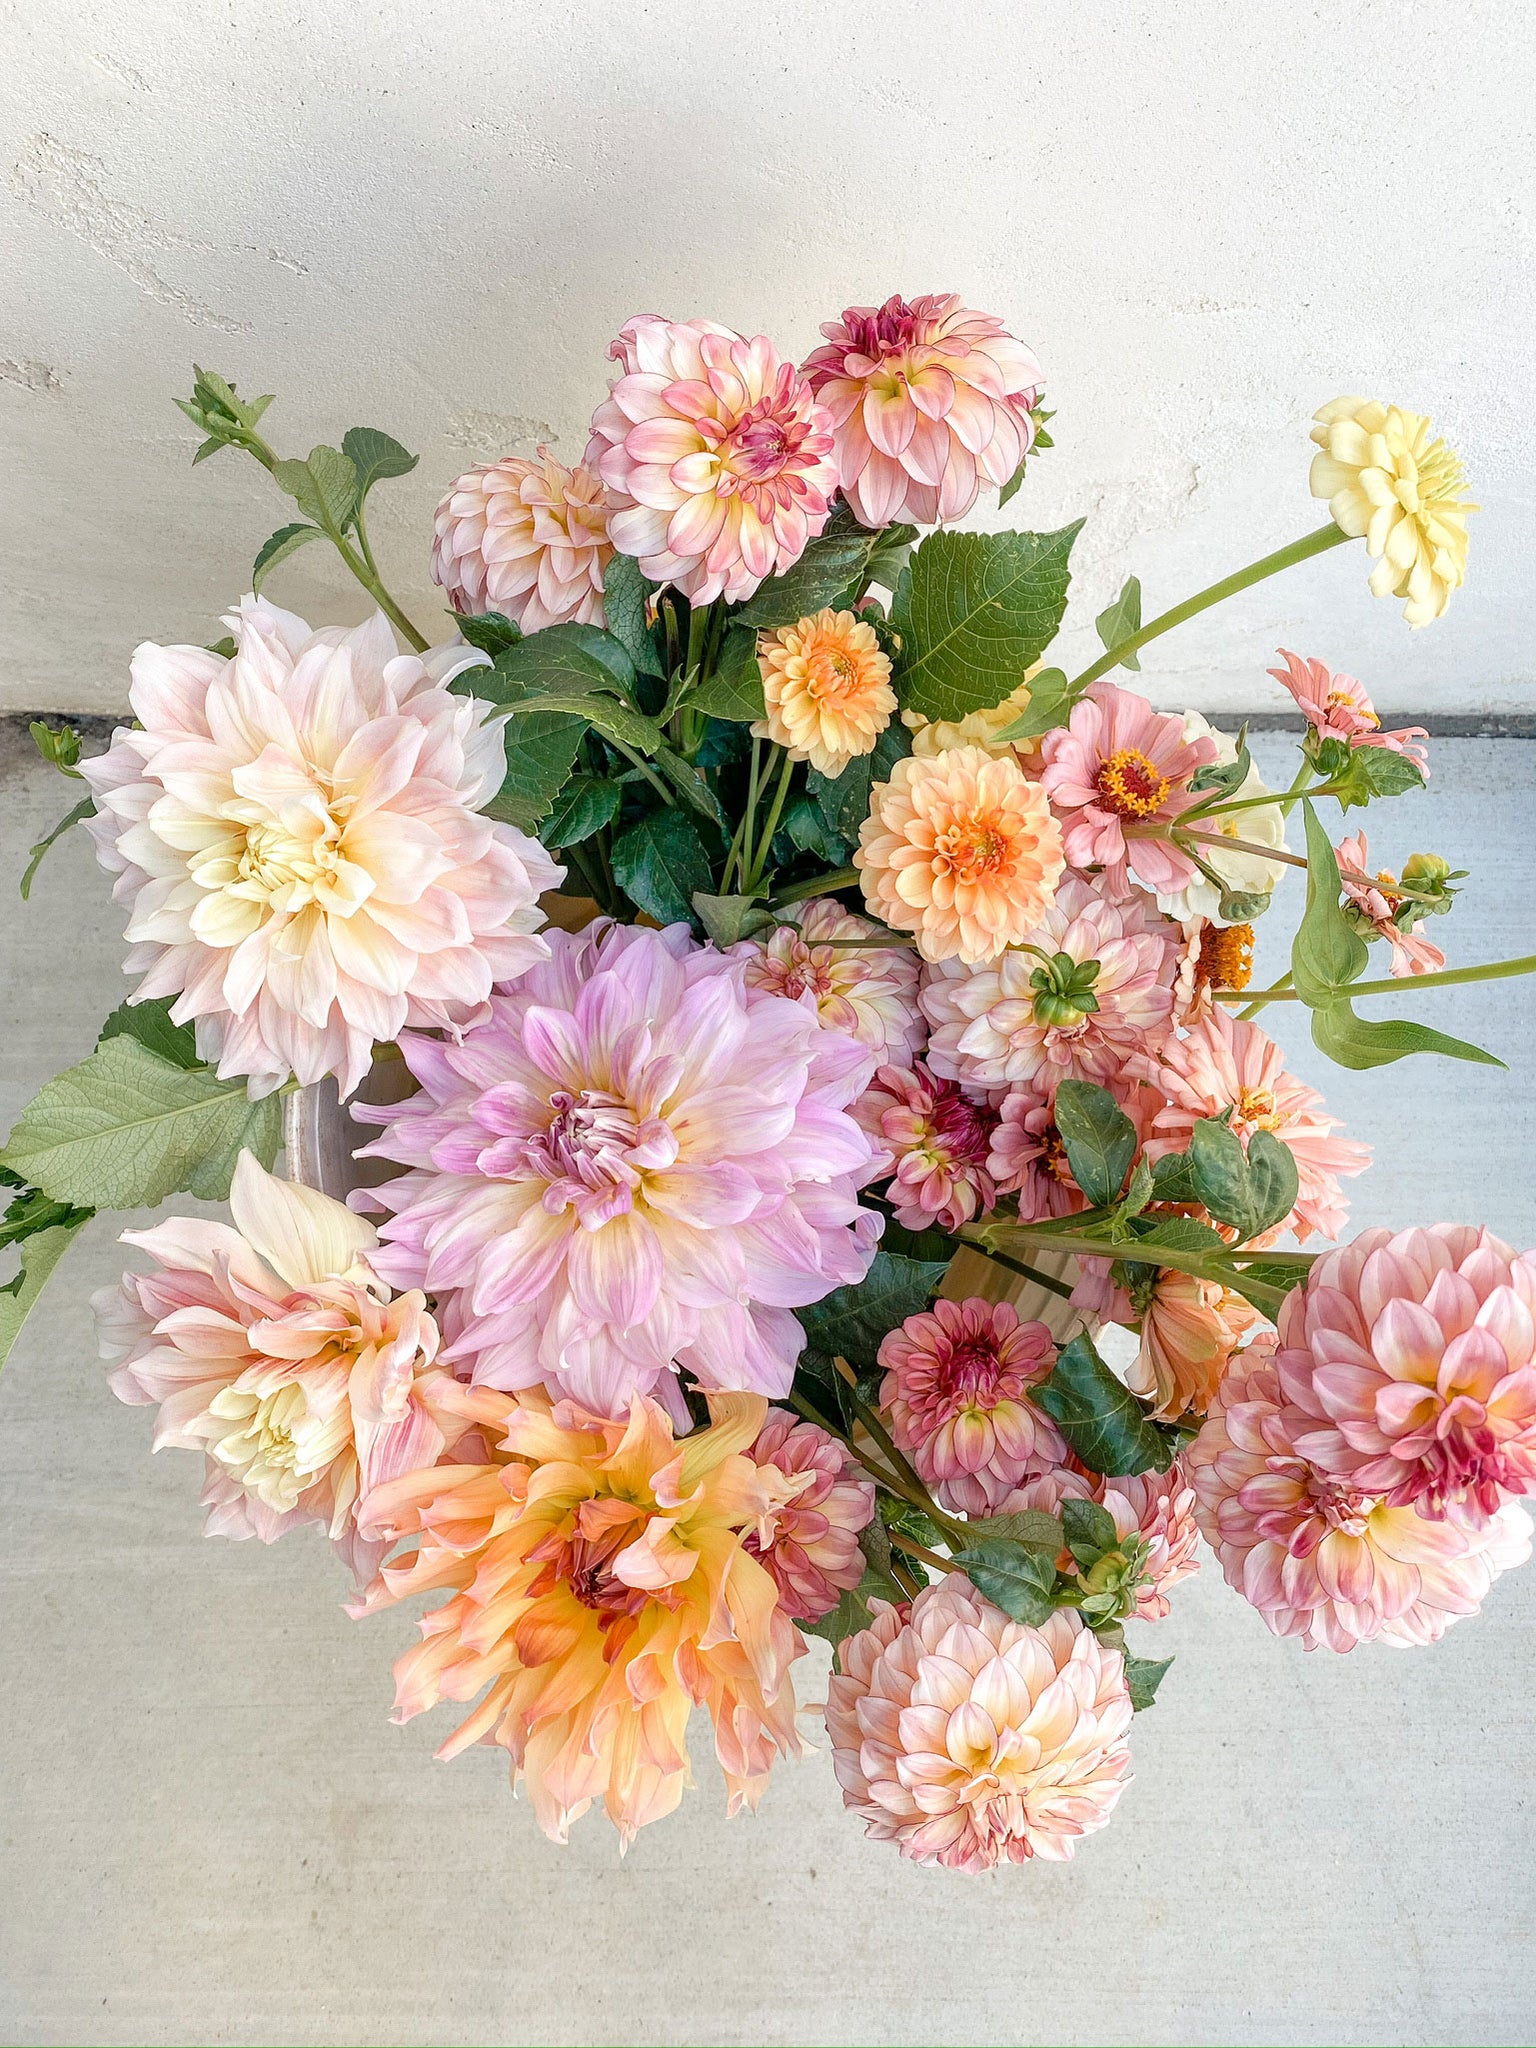 Locally Grown Flowers - Dahlias from Cielo Hills Flowers